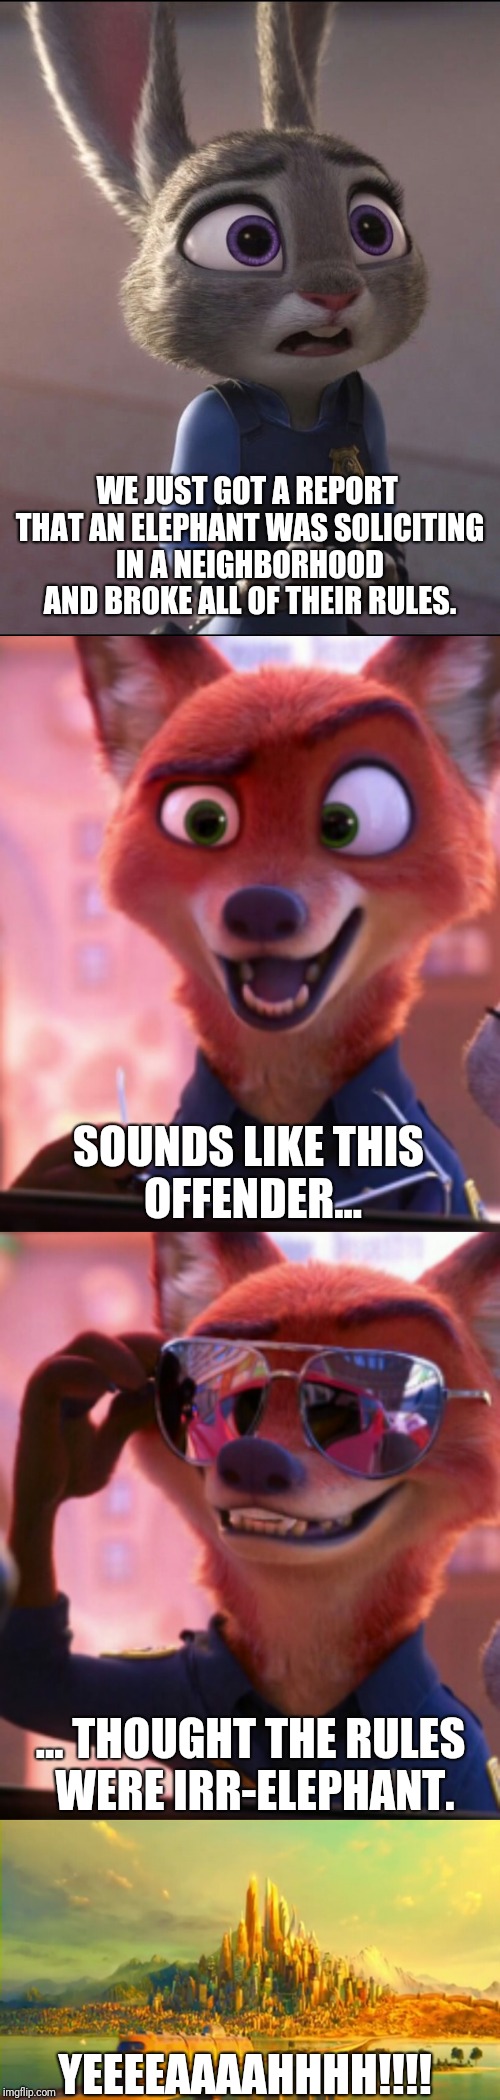 CSI: Zootopia 11 | WE JUST GOT A REPORT THAT AN ELEPHANT WAS SOLICITING IN A NEIGHBORHOOD AND BROKE ALL OF THEIR RULES. SOUNDS LIKE THIS OFFENDER... ... THOUGHT THE RULES WERE IRR-ELEPHANT. YEEEEAAAAHHHH!!!! | image tagged in zootopia,judy hopps,nick wilde,parody,funny,memes | made w/ Imgflip meme maker